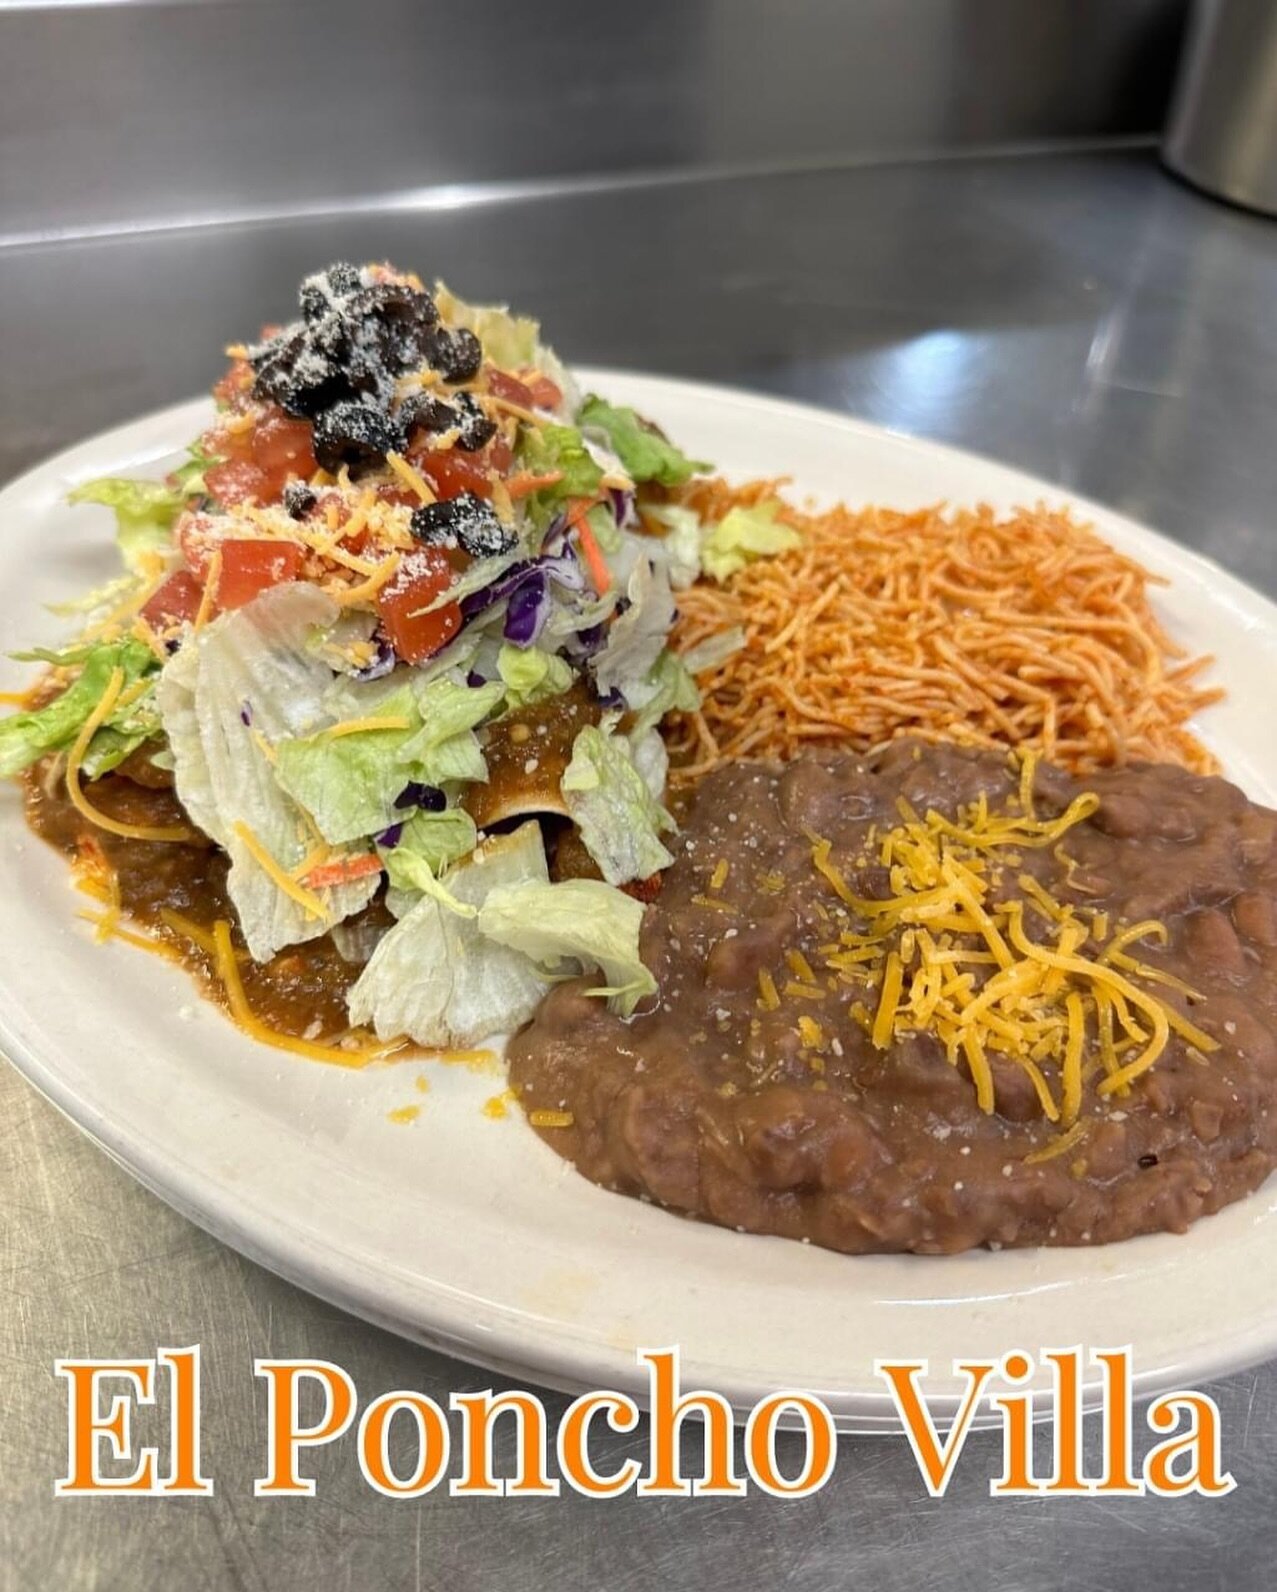 It&rsquo;s Taco Tuesday, and Gramma opens at 4pm to kick the week off right! 

Try the Poncho Villa for dinner tonight! Lean pork or chicken and cheese rolled in a flour tortilla, smothered in our family&rsquo;s house-made Chile verde sauce (hot 🥵),